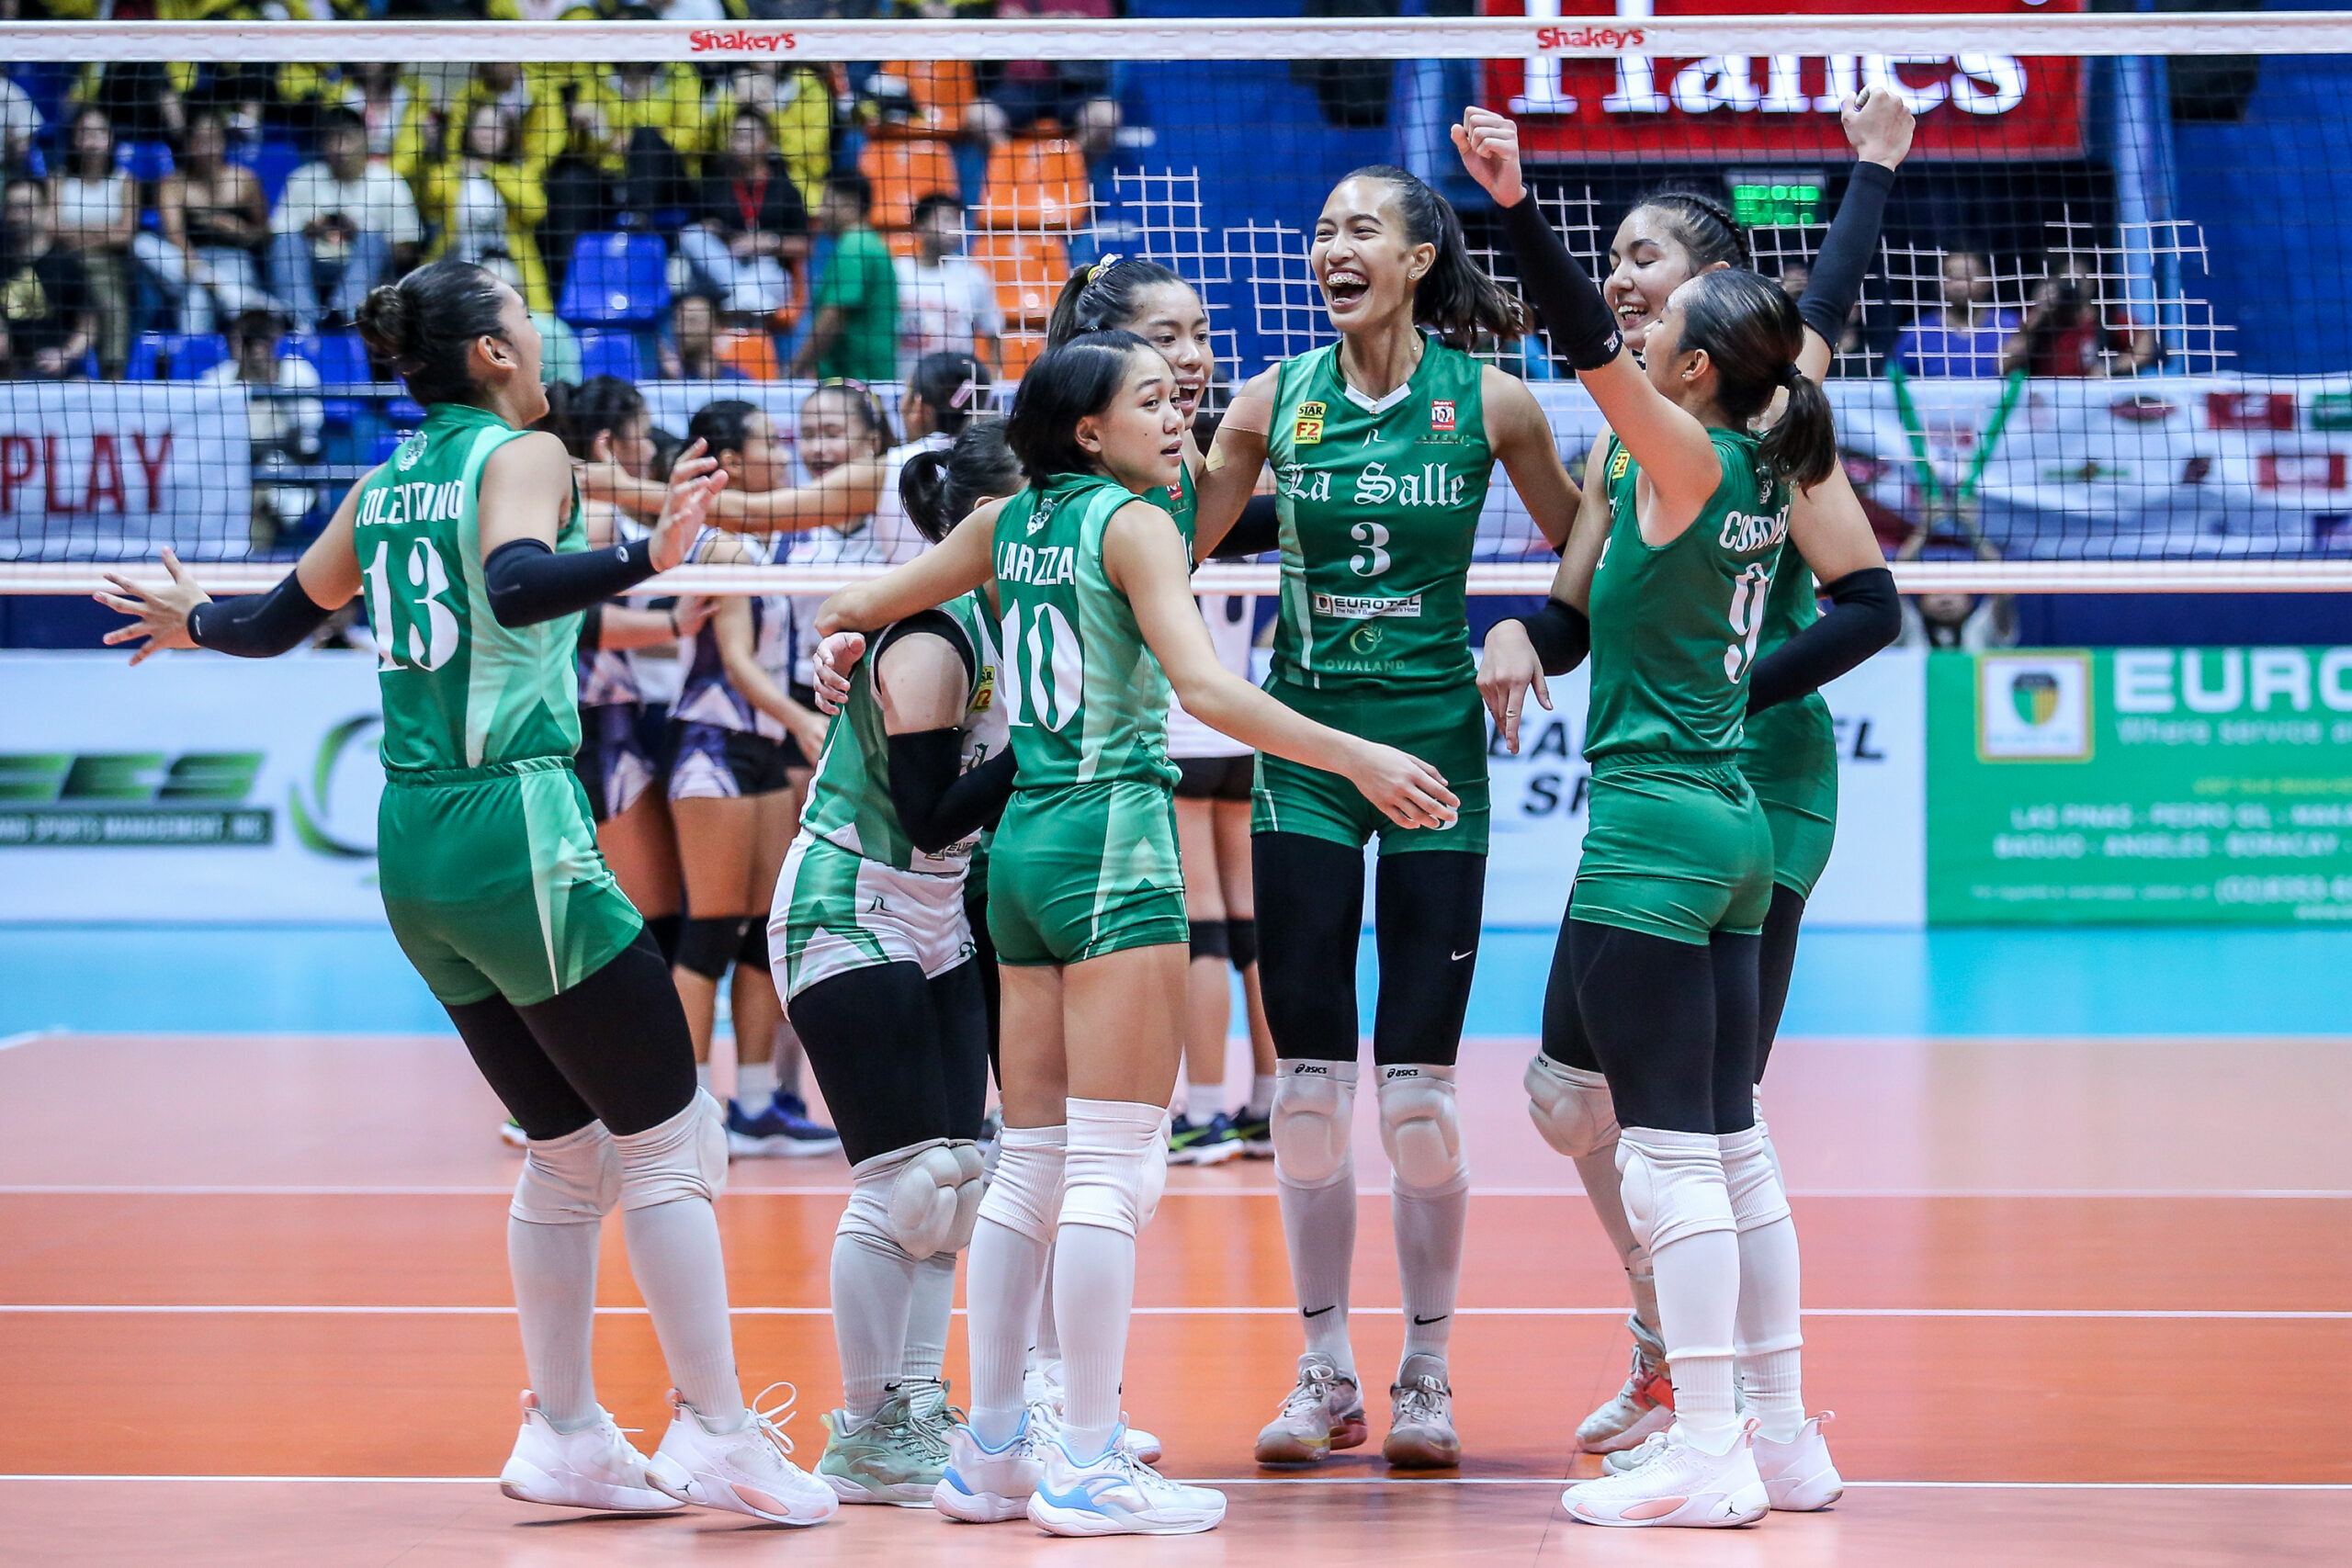 La Salle not satisfied after latest title win | Inquirer Sports